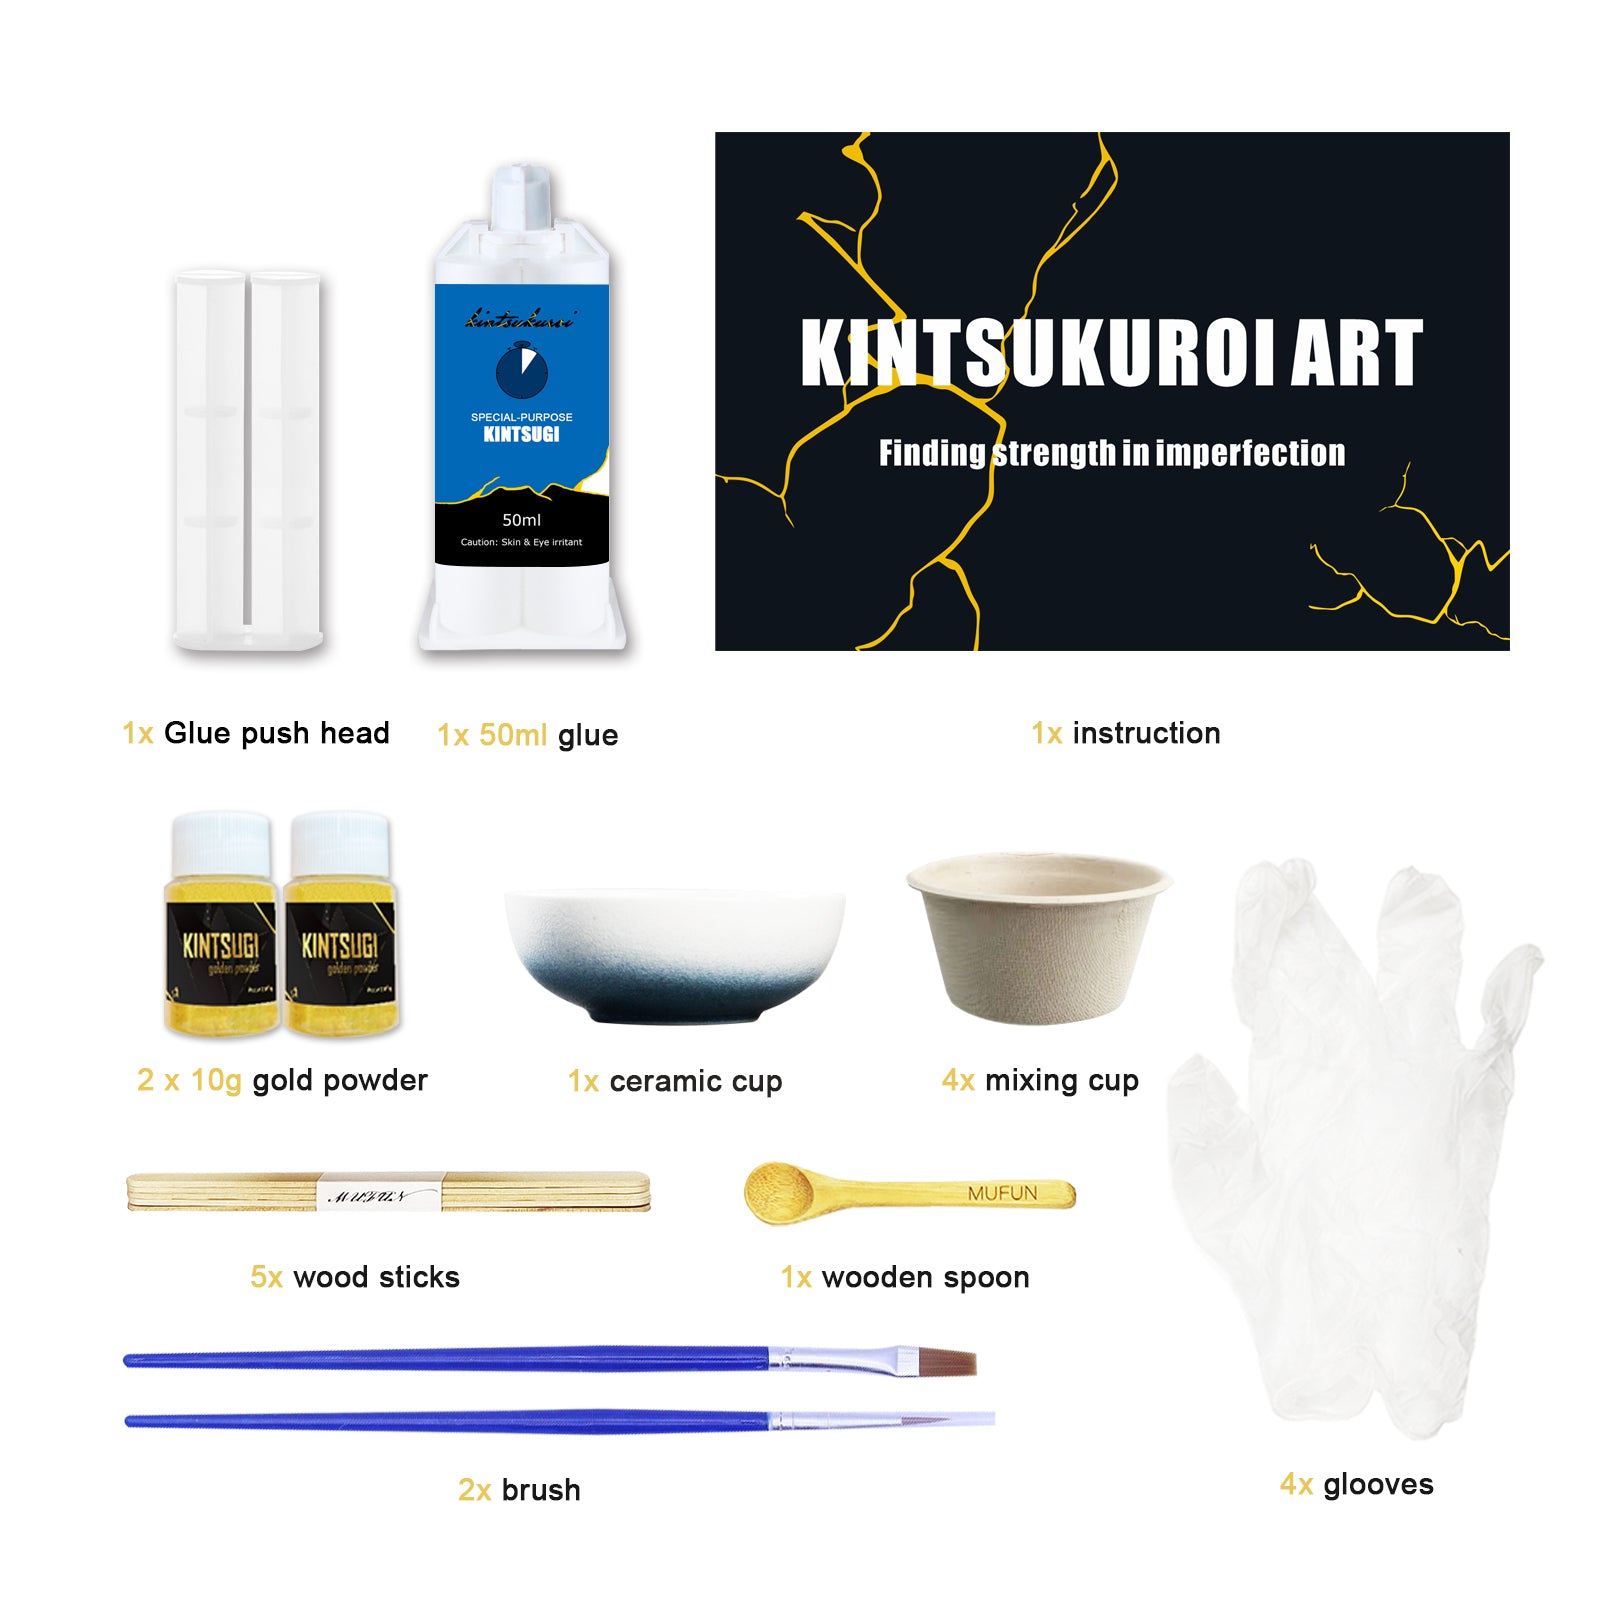 MUFUN Kintsugi Repair Kit Repair Your Meaningful Pottery with Gold Powder Glue - Comes with Two Practice Ceramic Cups for Starter